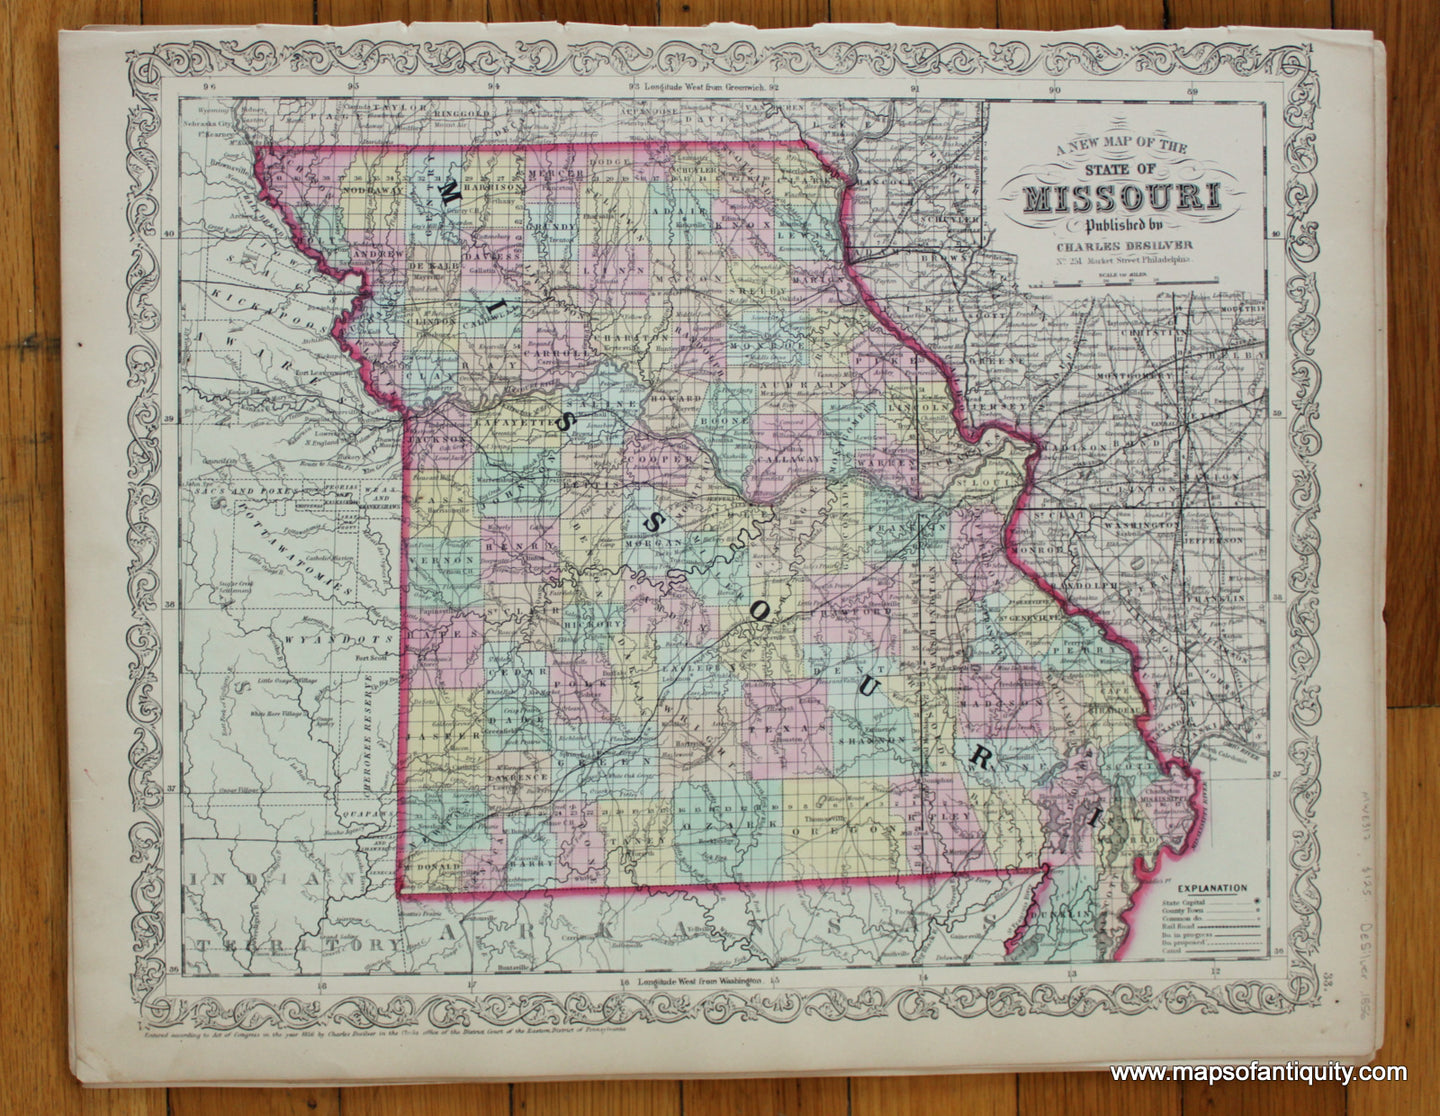 Antique-Hand-Colored-Map-A-New-Map-of-the-State-of-Missouri-Published-by-Charles-Desilver-United-States-Midwest-1856-Desilver-Maps-Of-Antiquity